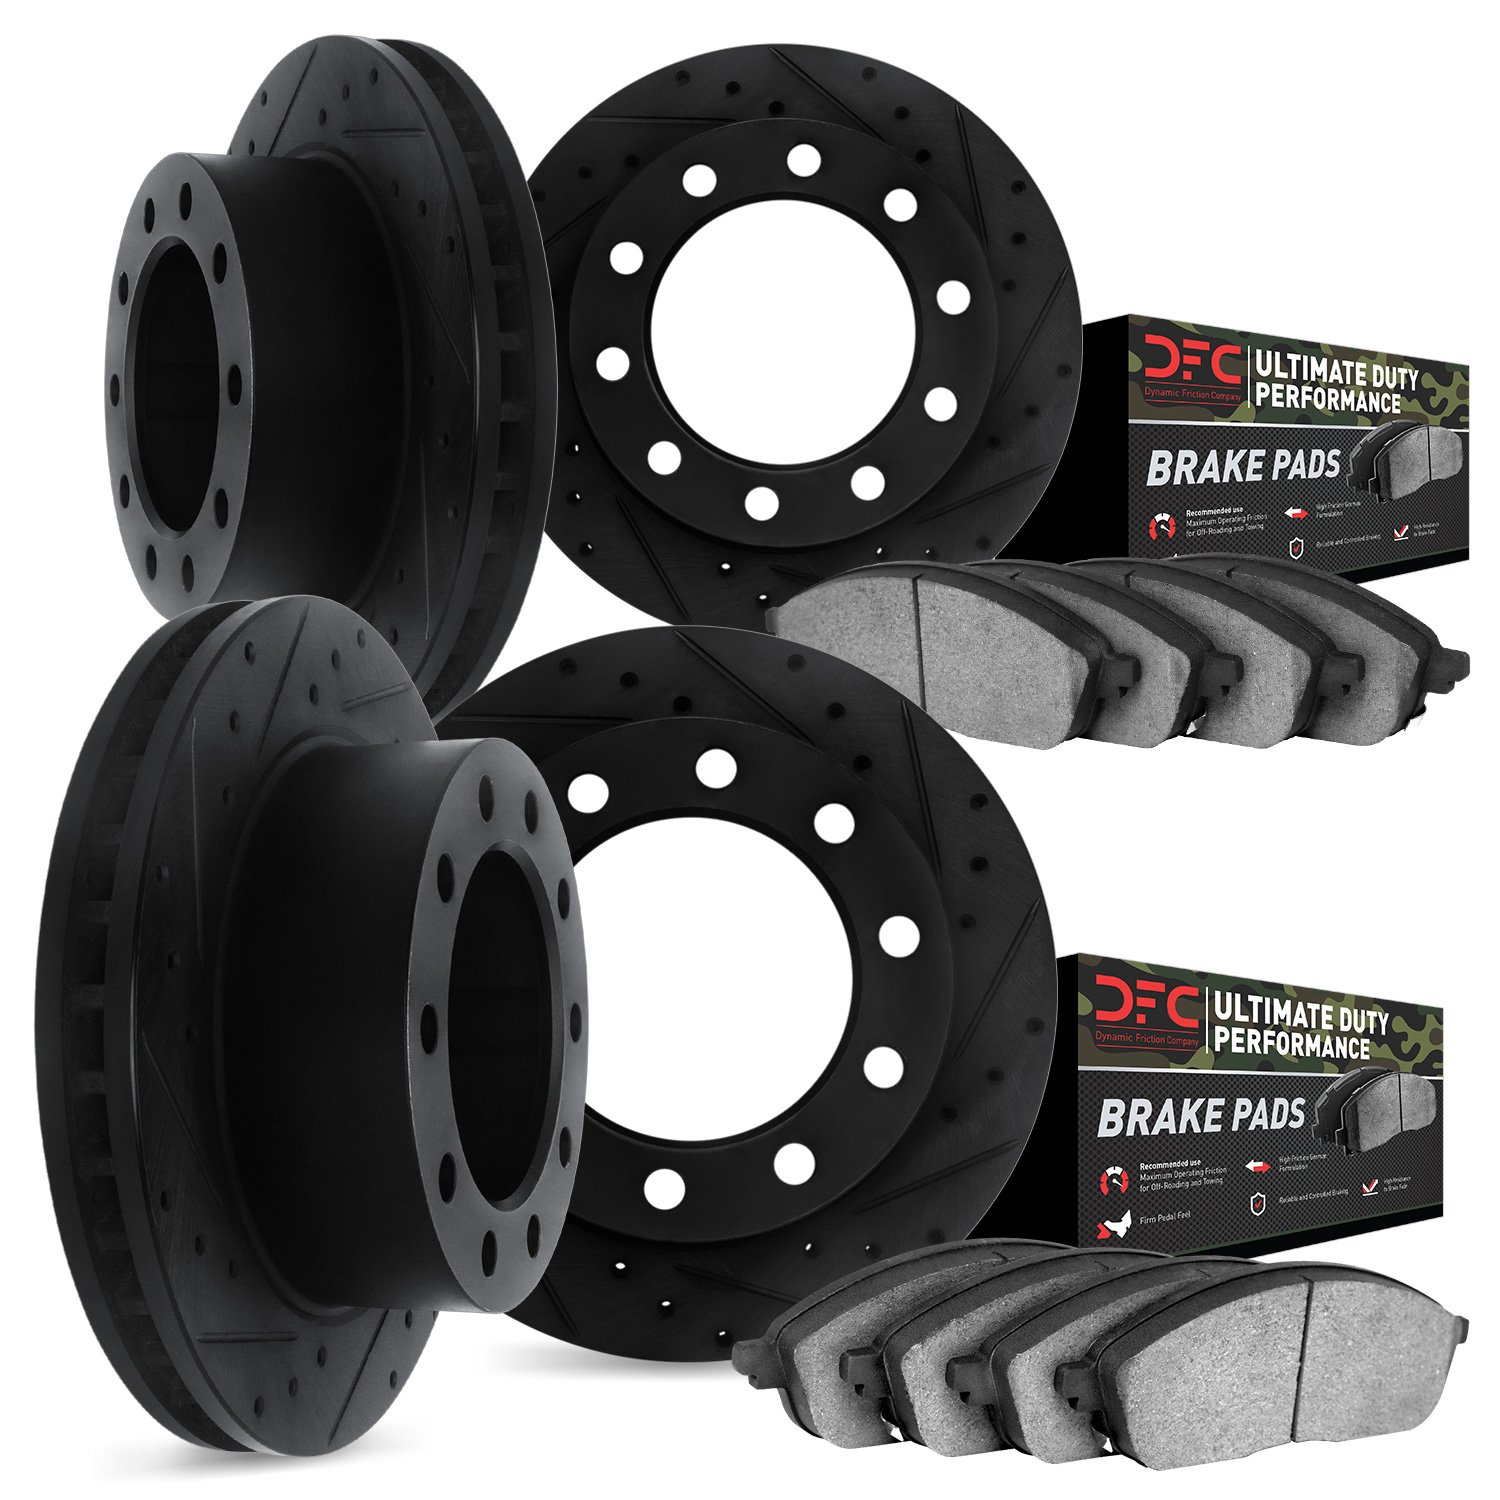 8404-54014 Drilled/Slotted Brake Rotors with Ultimate-Duty Brake Pads Kit [Black], 1999-2004 Ford/Lincoln/Mercury/Mazda, Positio